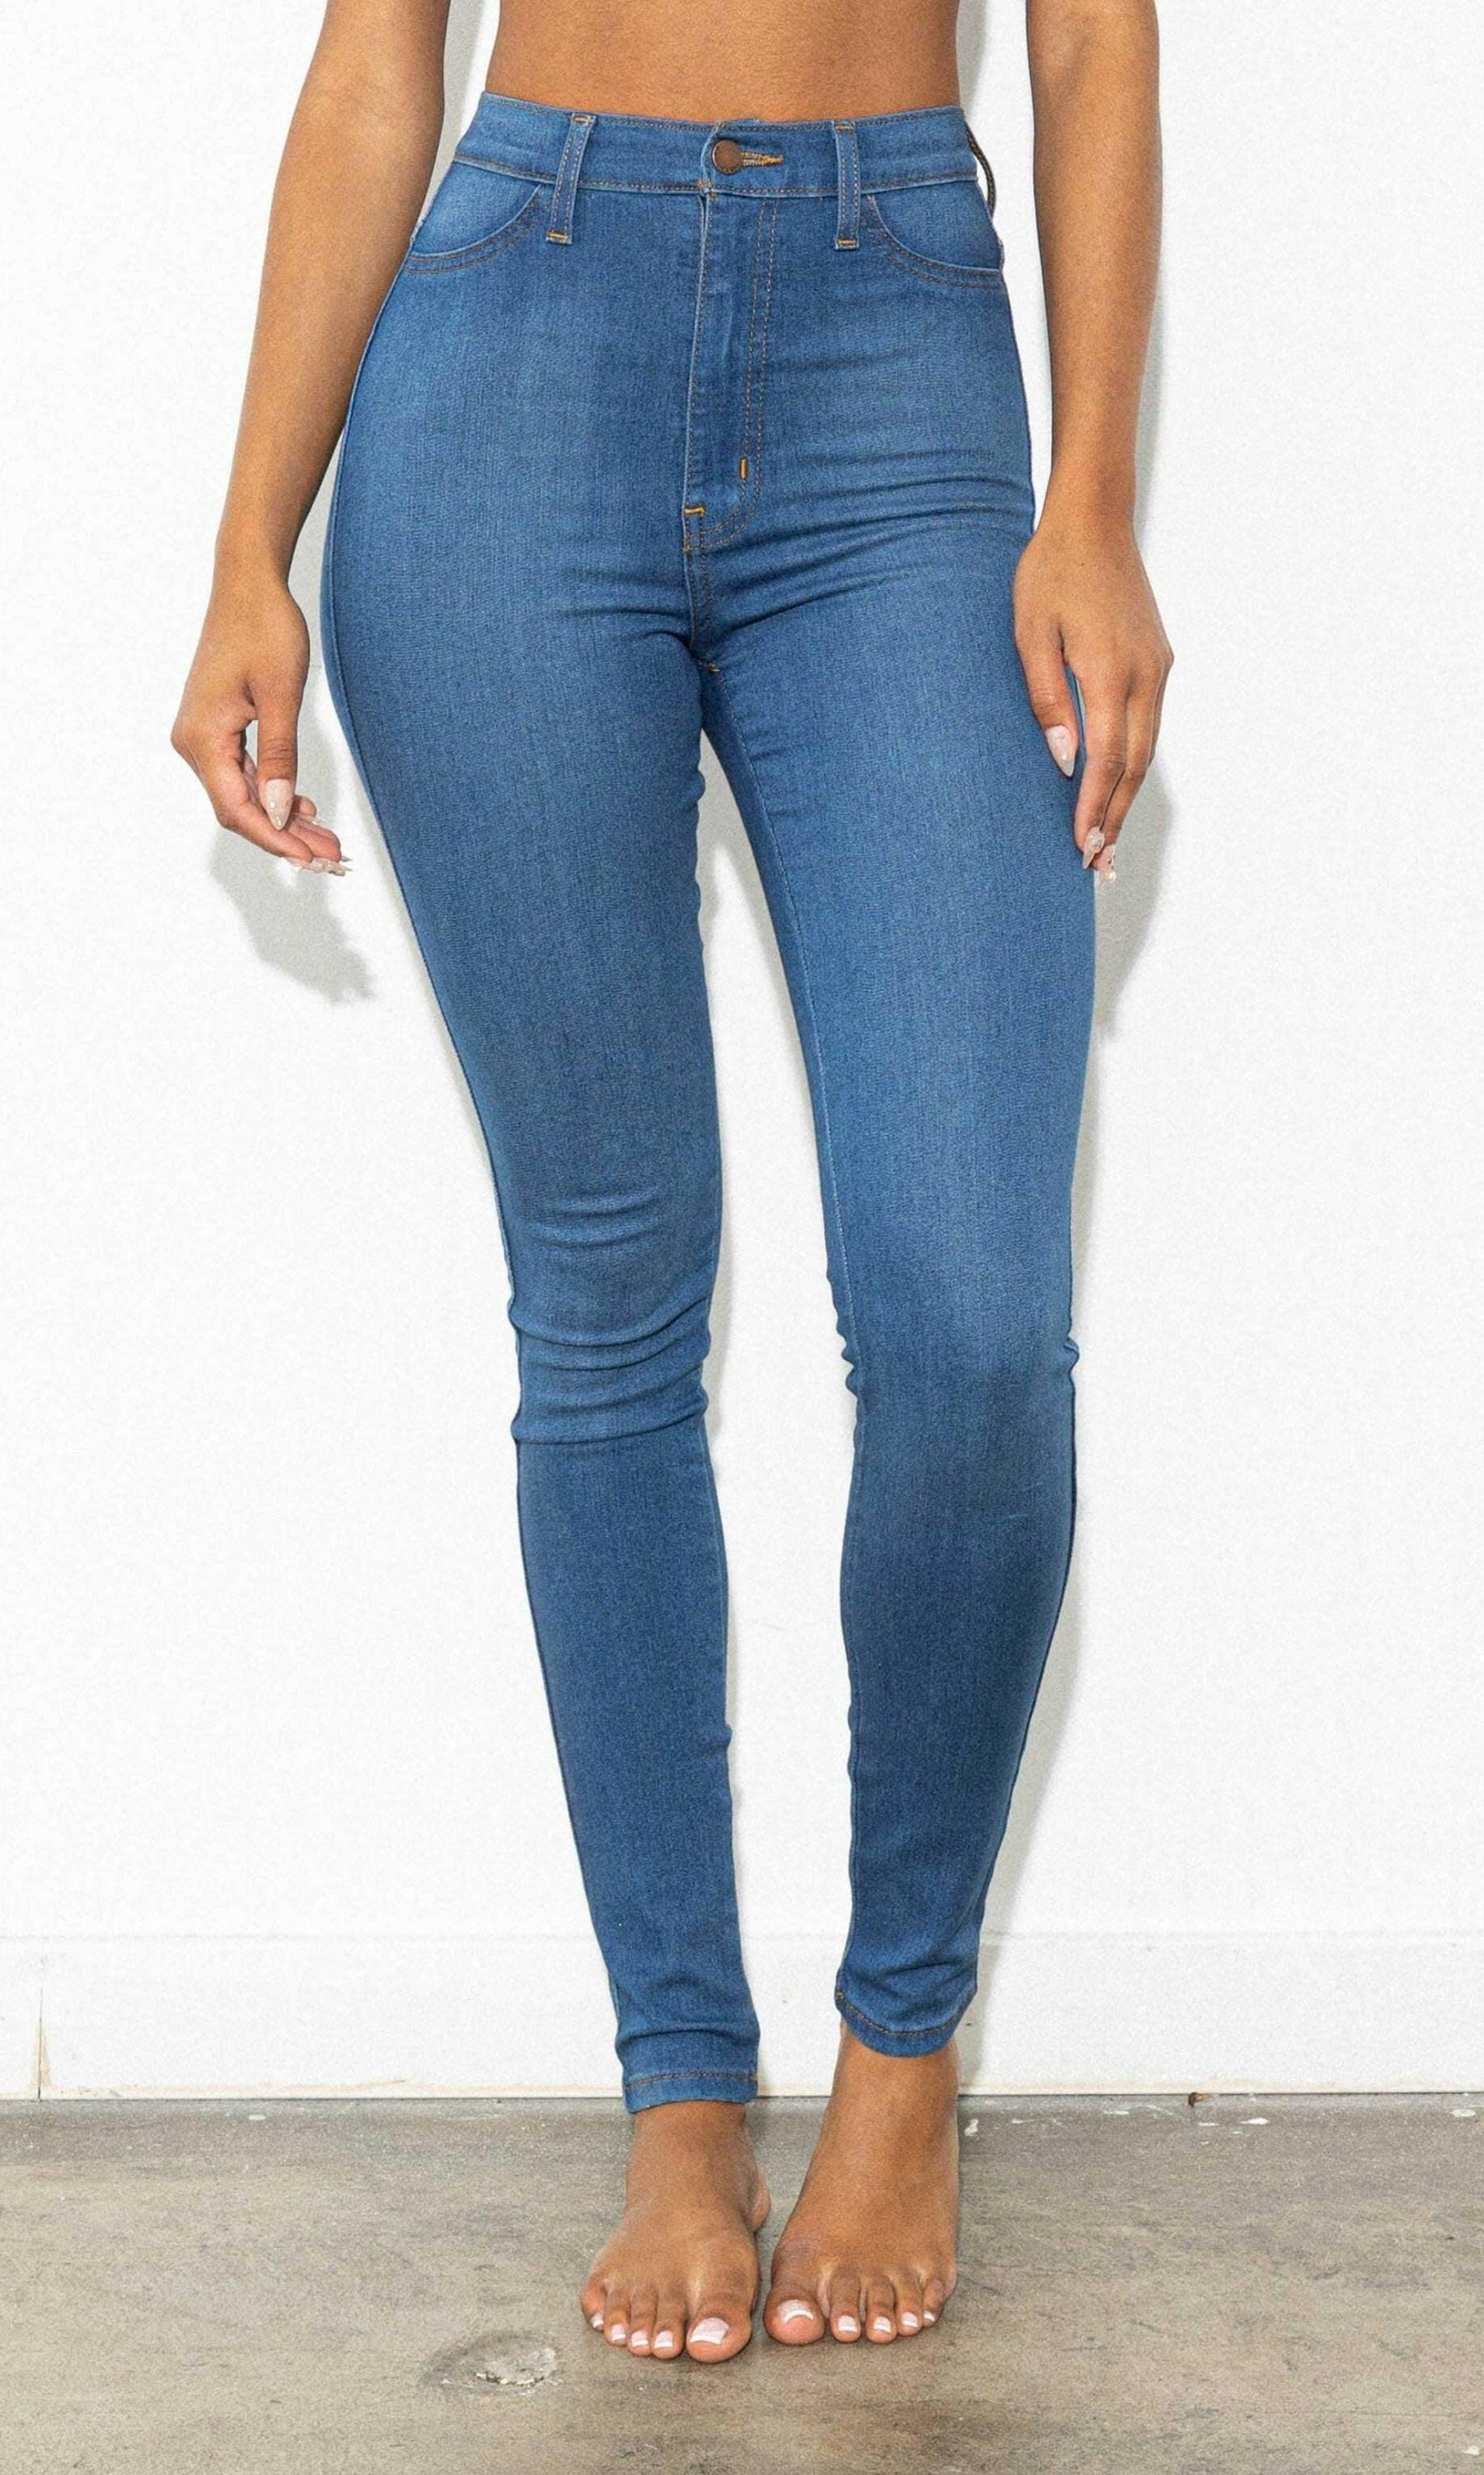 Epicplacess JEANS Super Smoothing Stretch Skinny Jeans